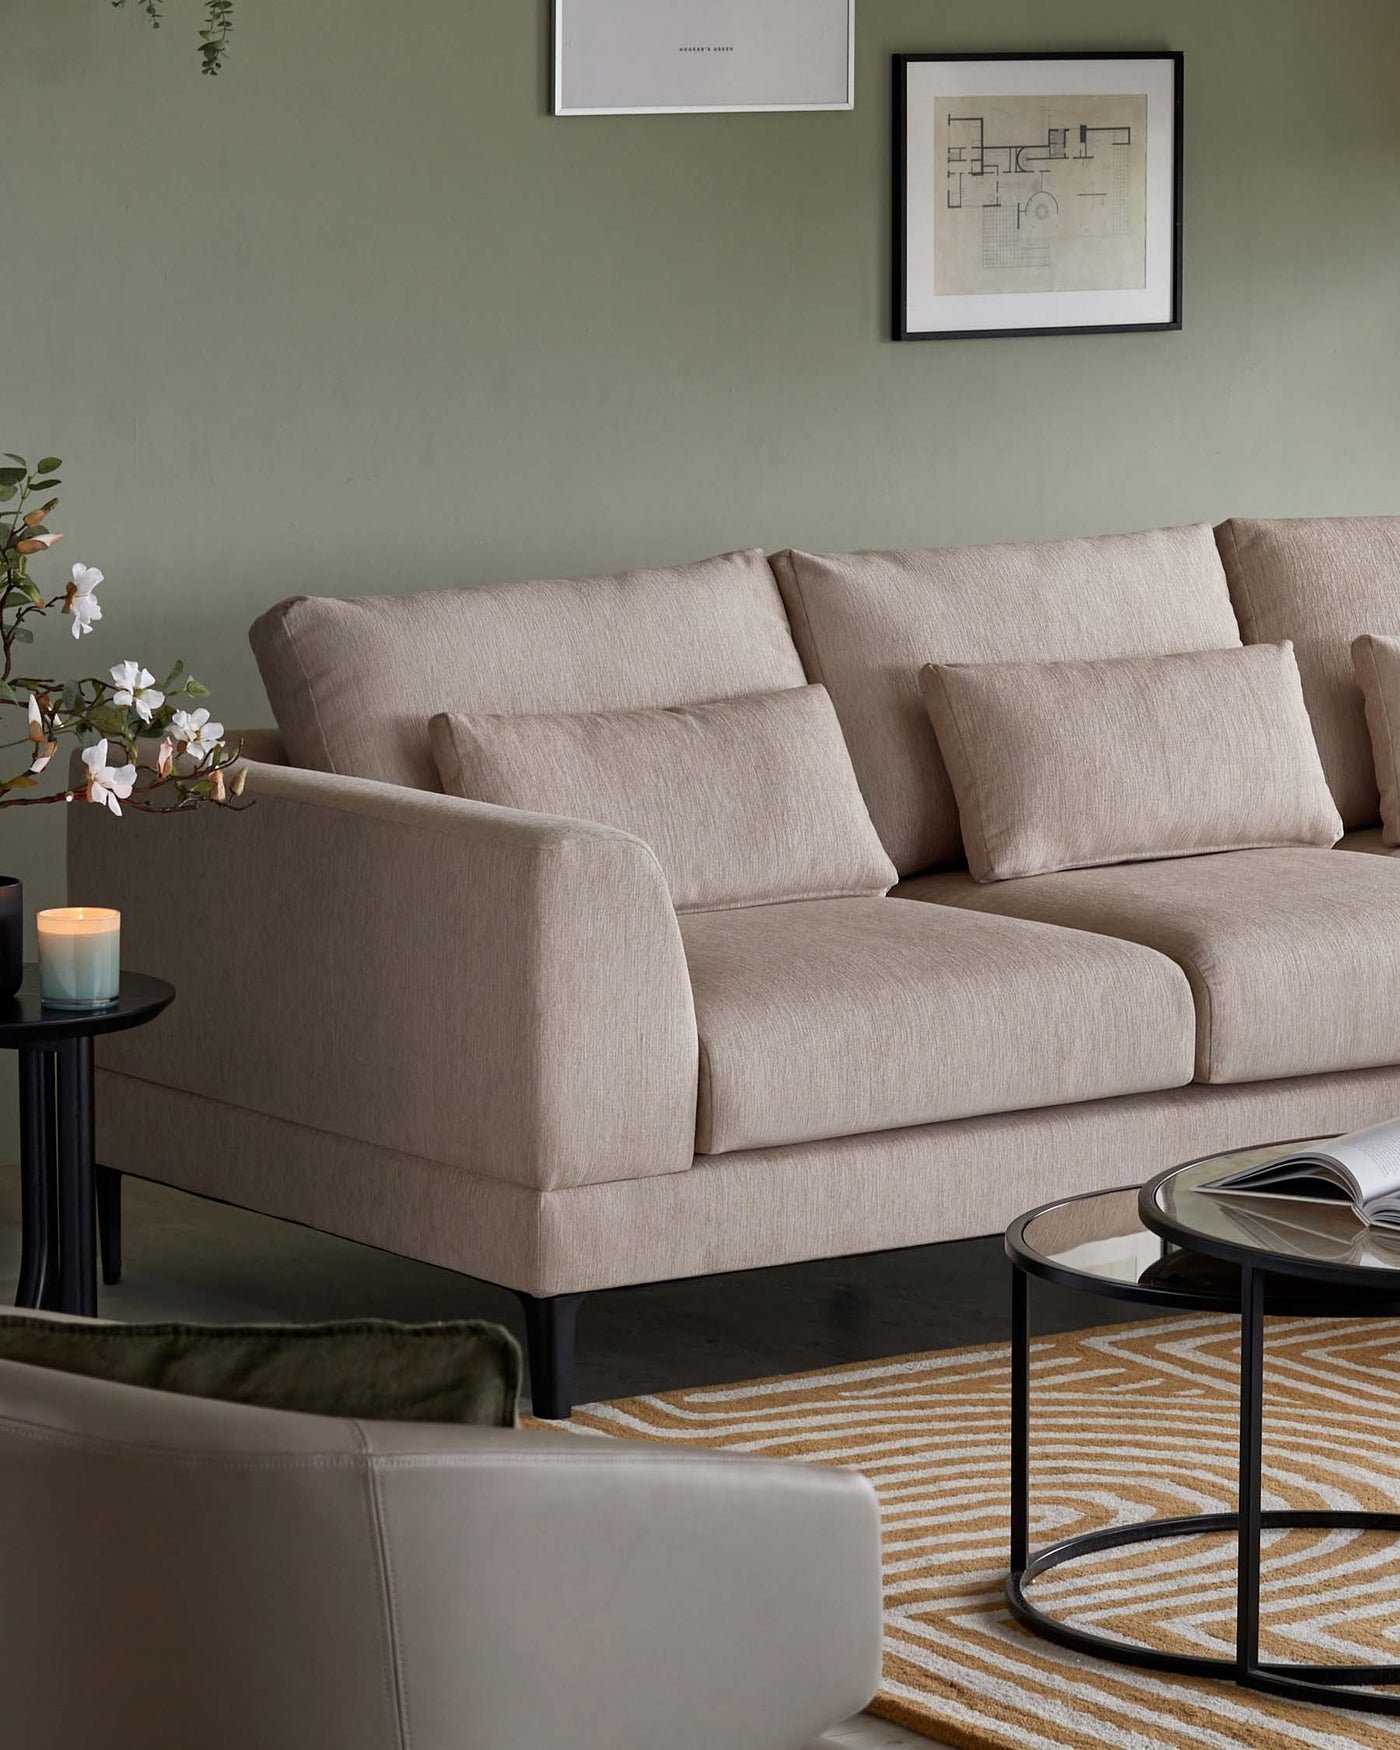 Beige contemporary three-seater fabric sofa with plush cushions and dark wooden legs, accompanied by a round black side table with clear glass top, on an abstract-patterned area rug.